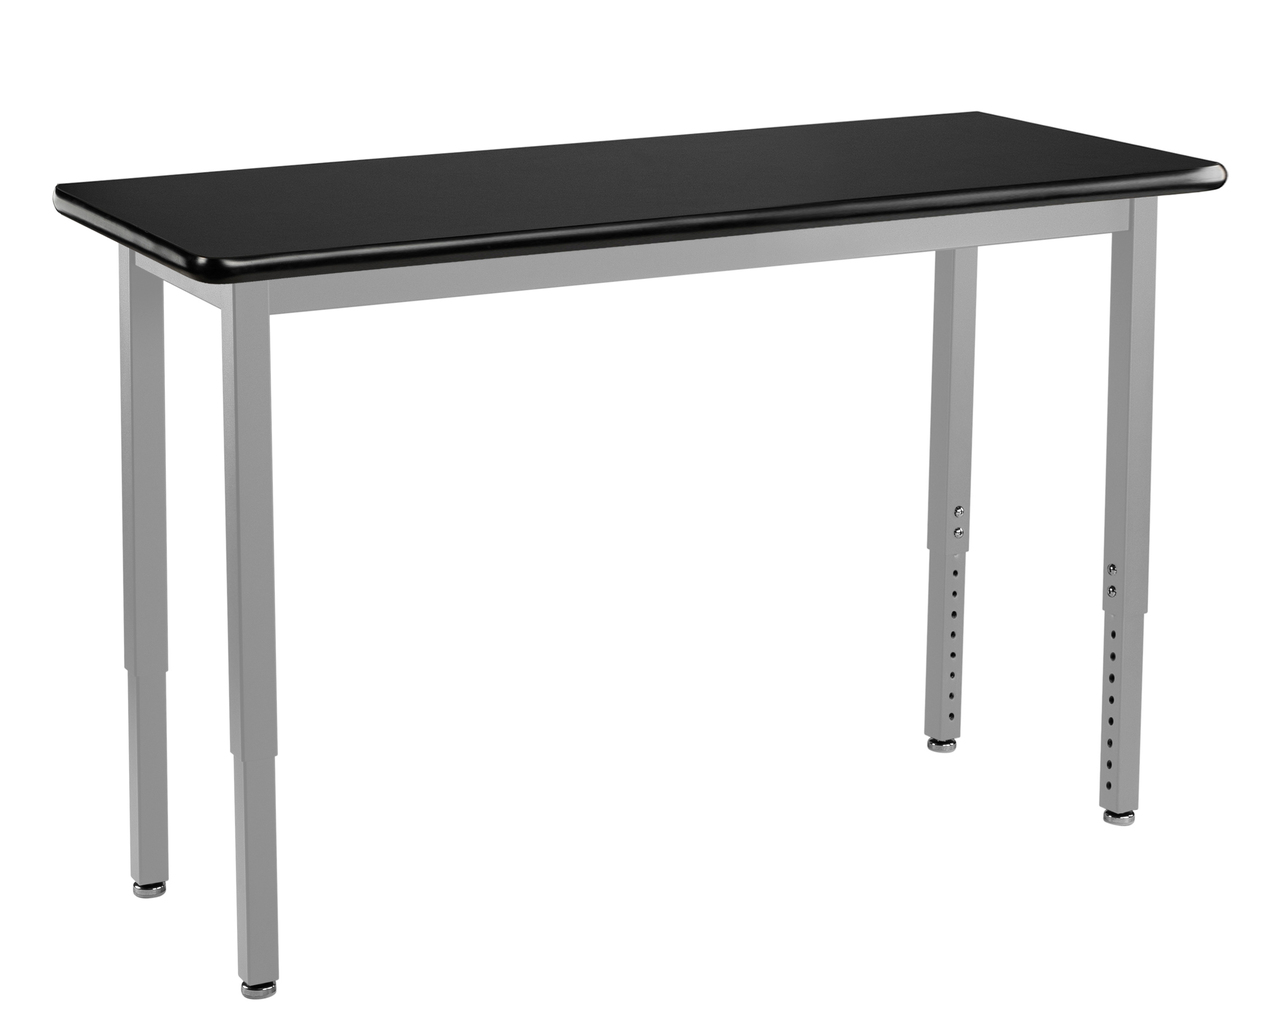 NPS Steel Science Lab Table, 18" x 42", HPL Top - Black Surface Color